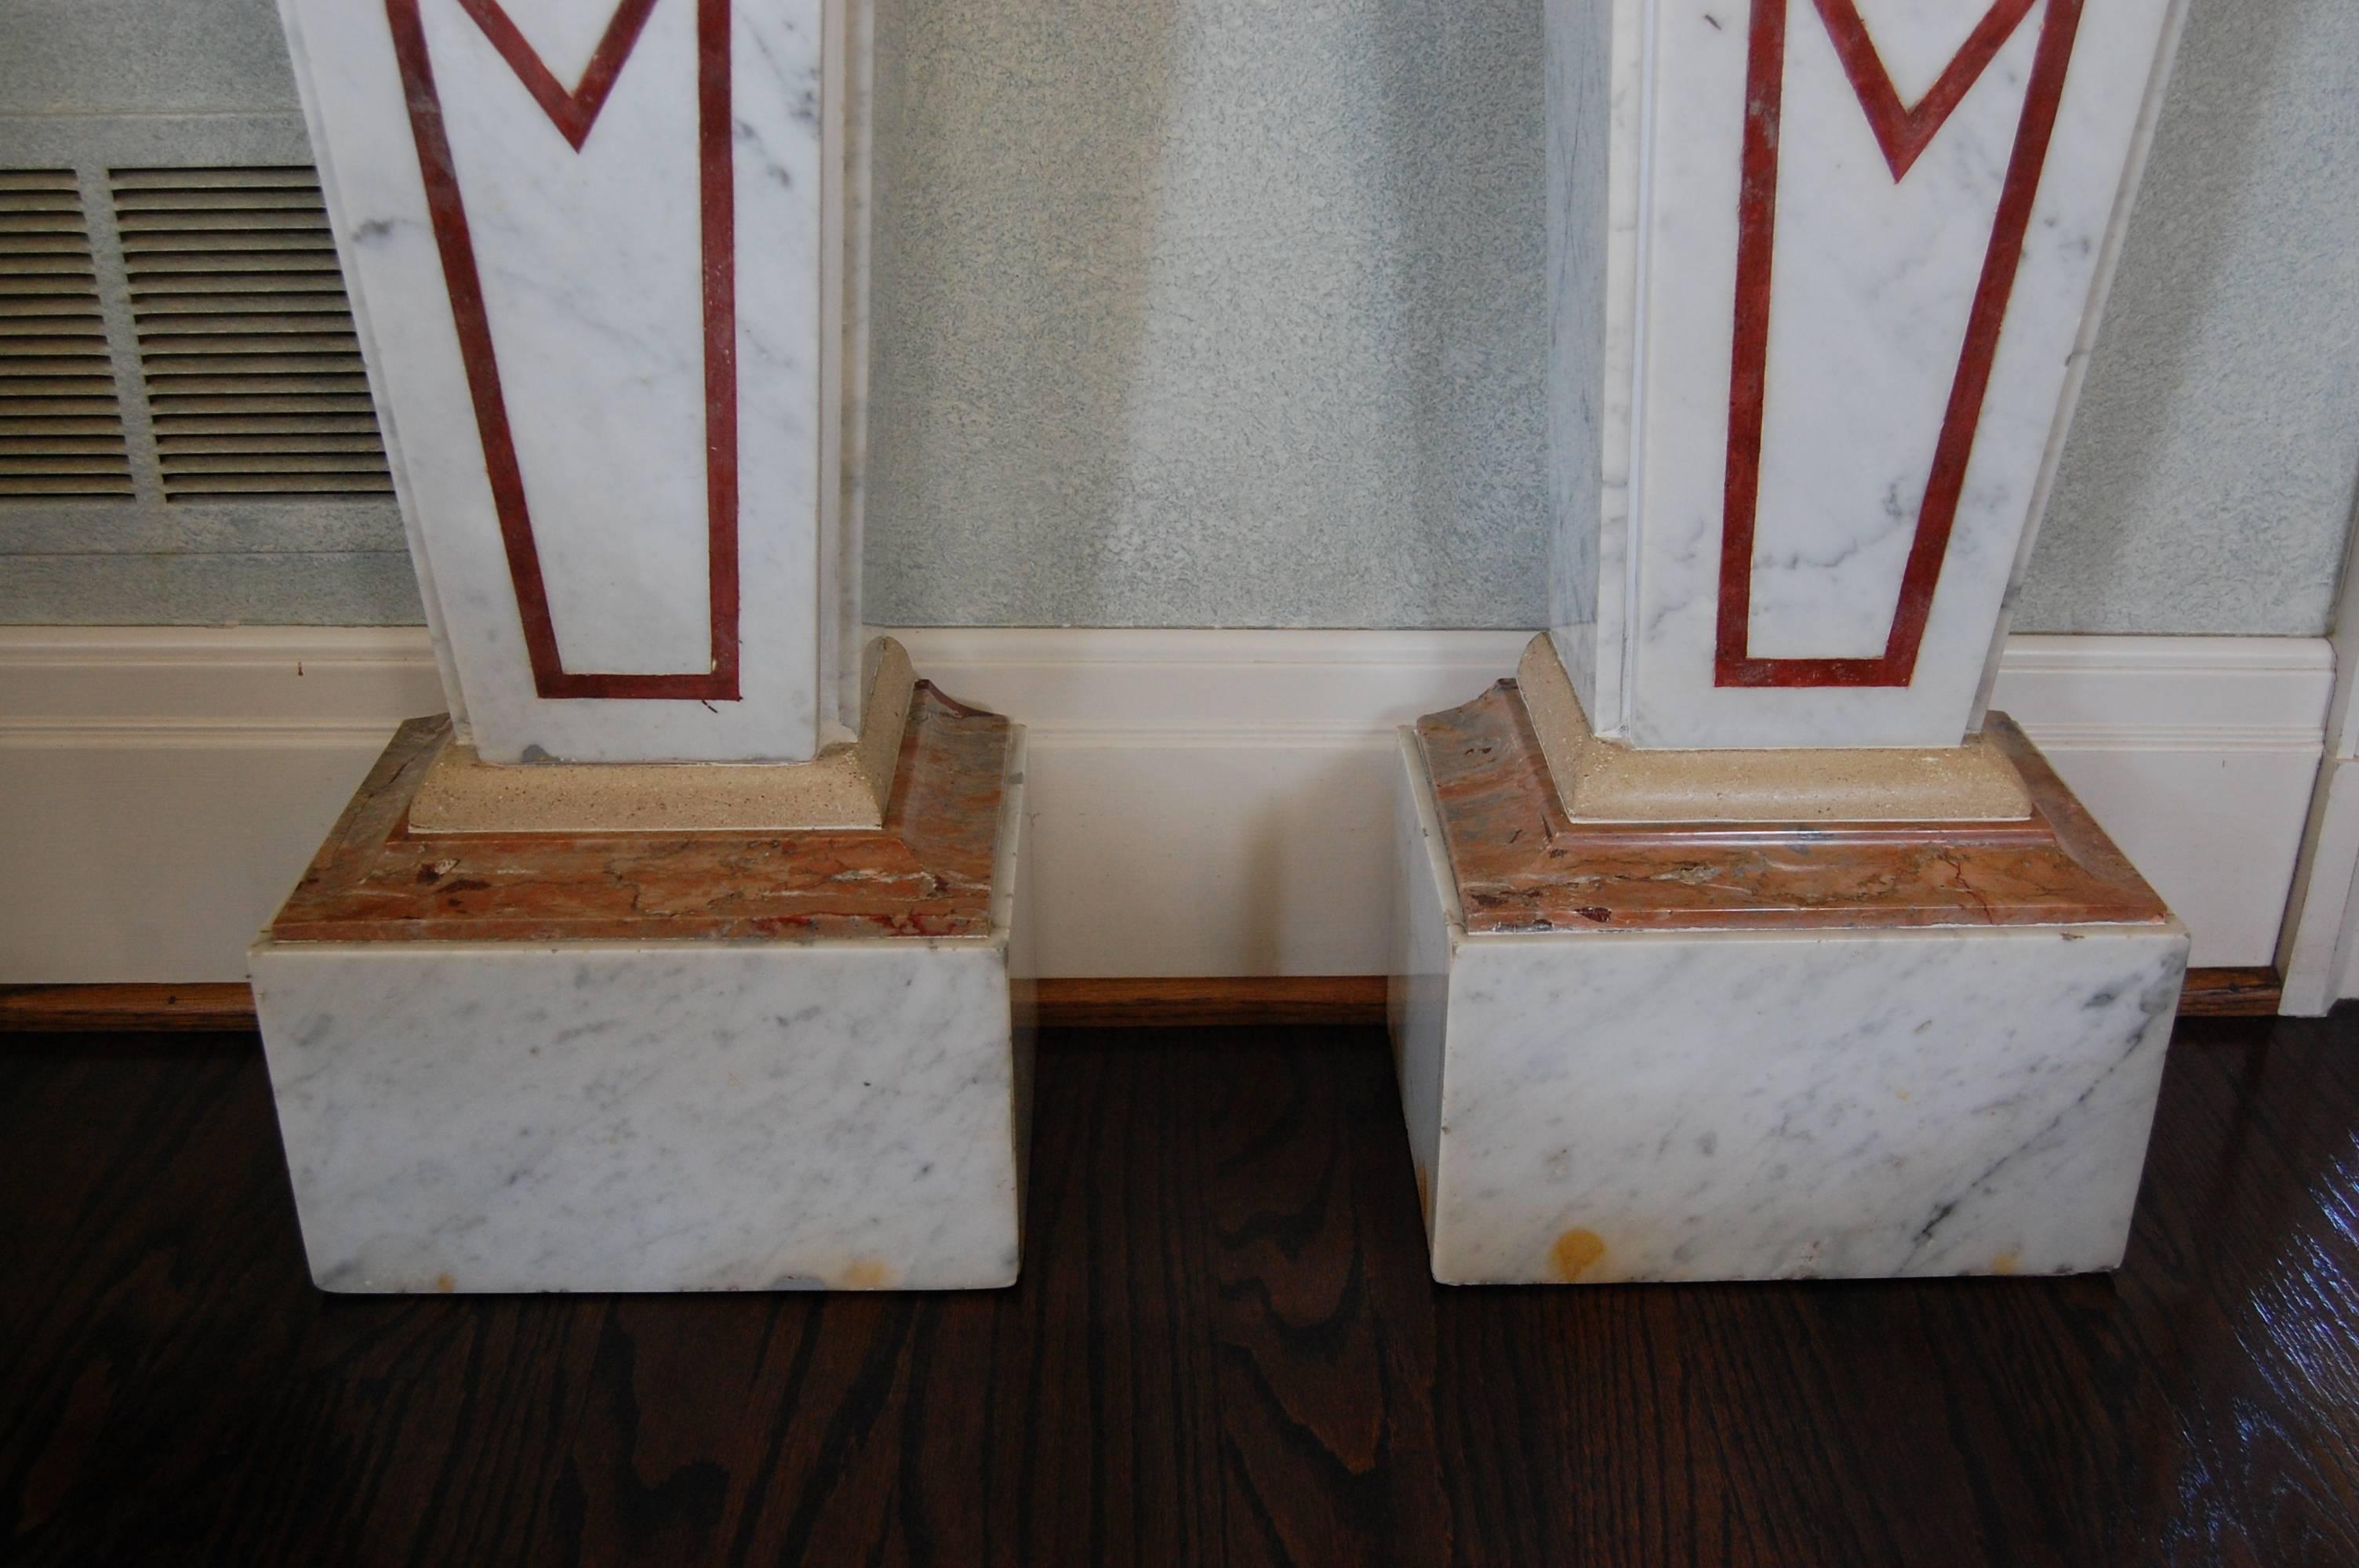 Carrara Marble Pair of Italian Neoclassical Marble Pedestals, Late 19th Century For Sale